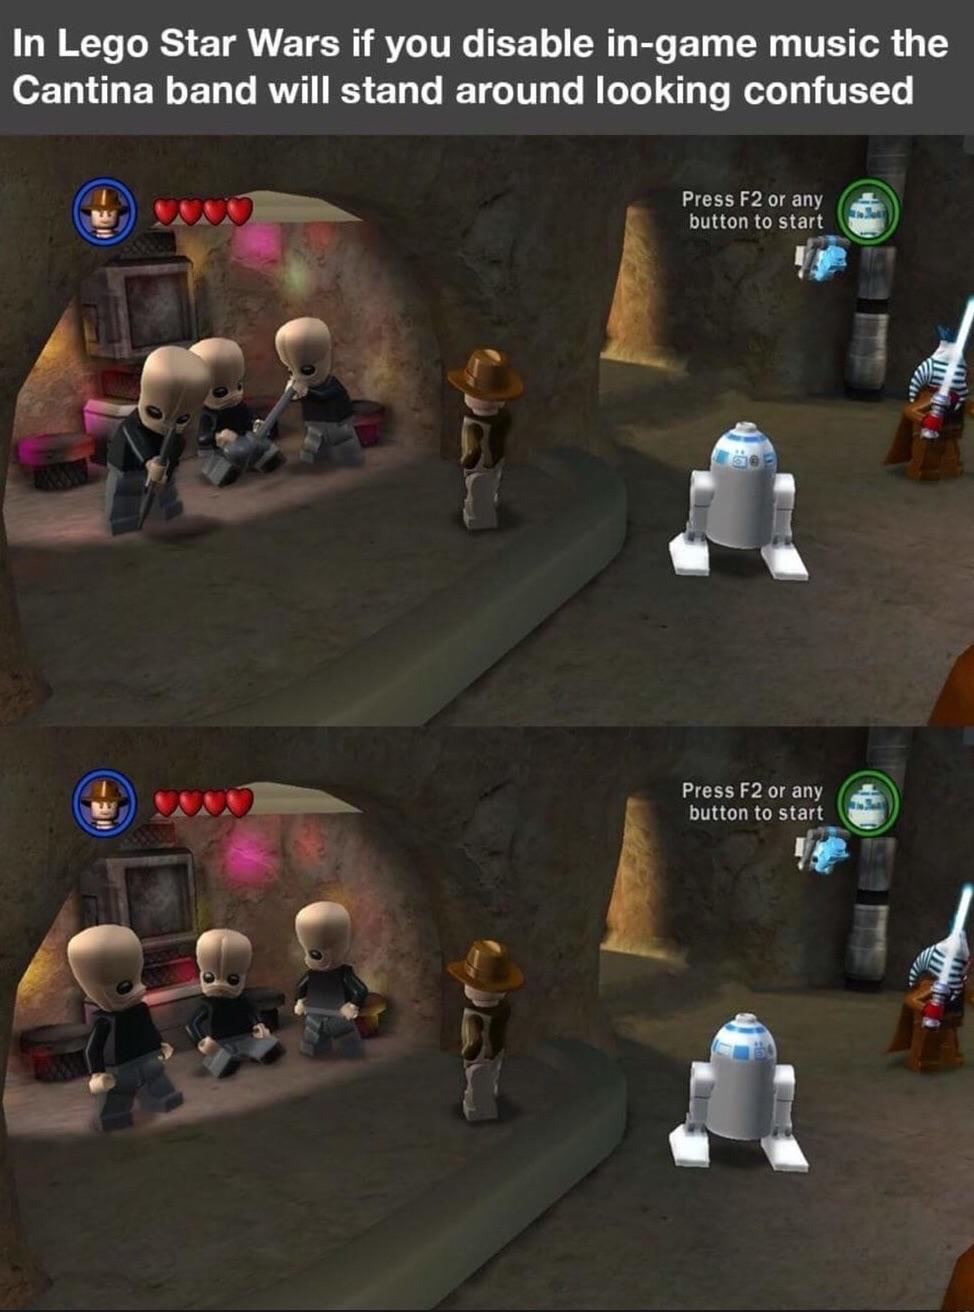 cantina band lego star wars - In Lego Star Wars if you disable ingame music the Cantina band will stand around looking confused Press F2 or any button to start Press F2 or any button to start